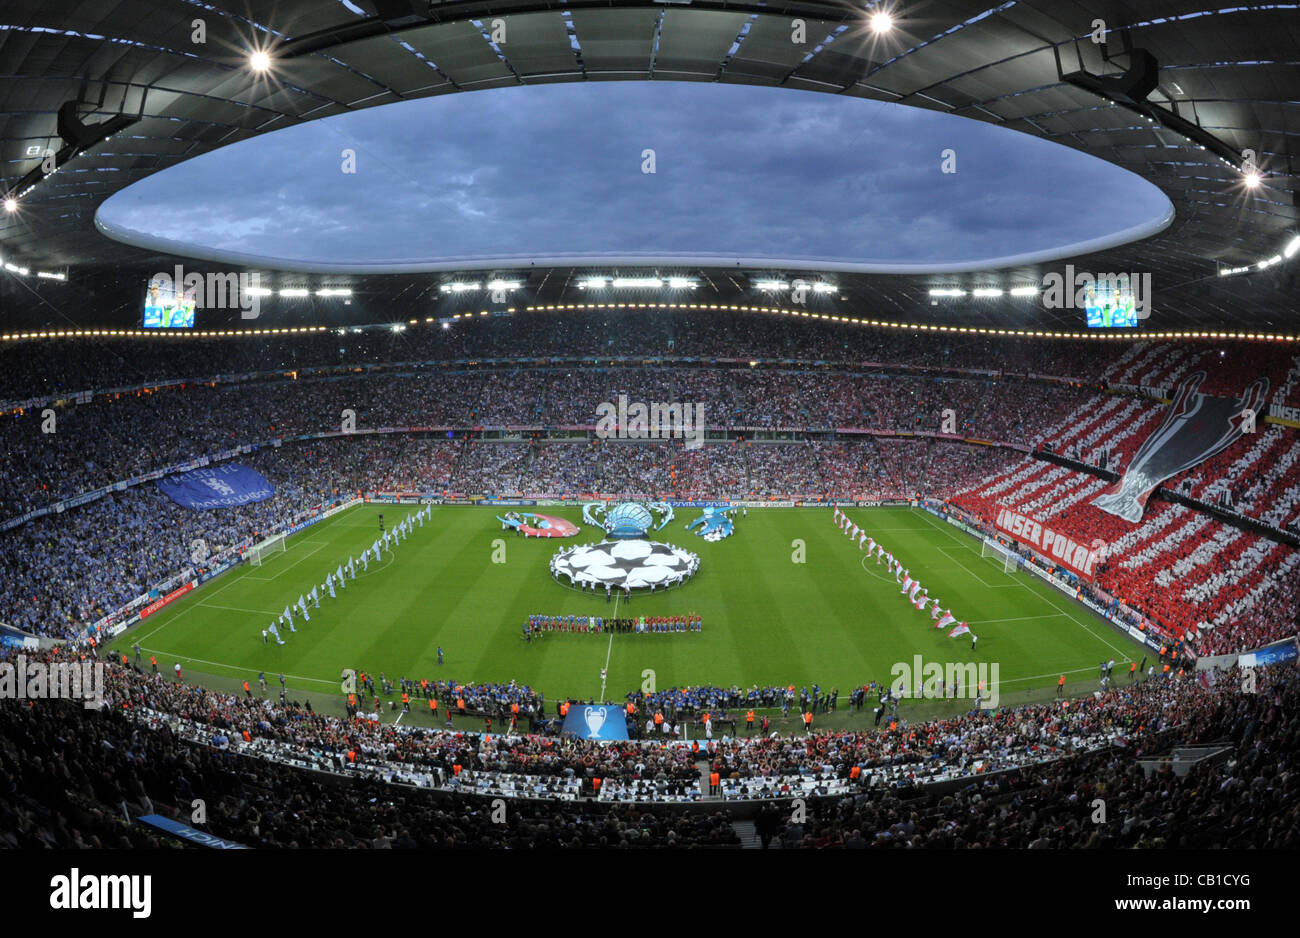 2012 UEFA Champions League Final Opening Ceremony, Allianz Arena